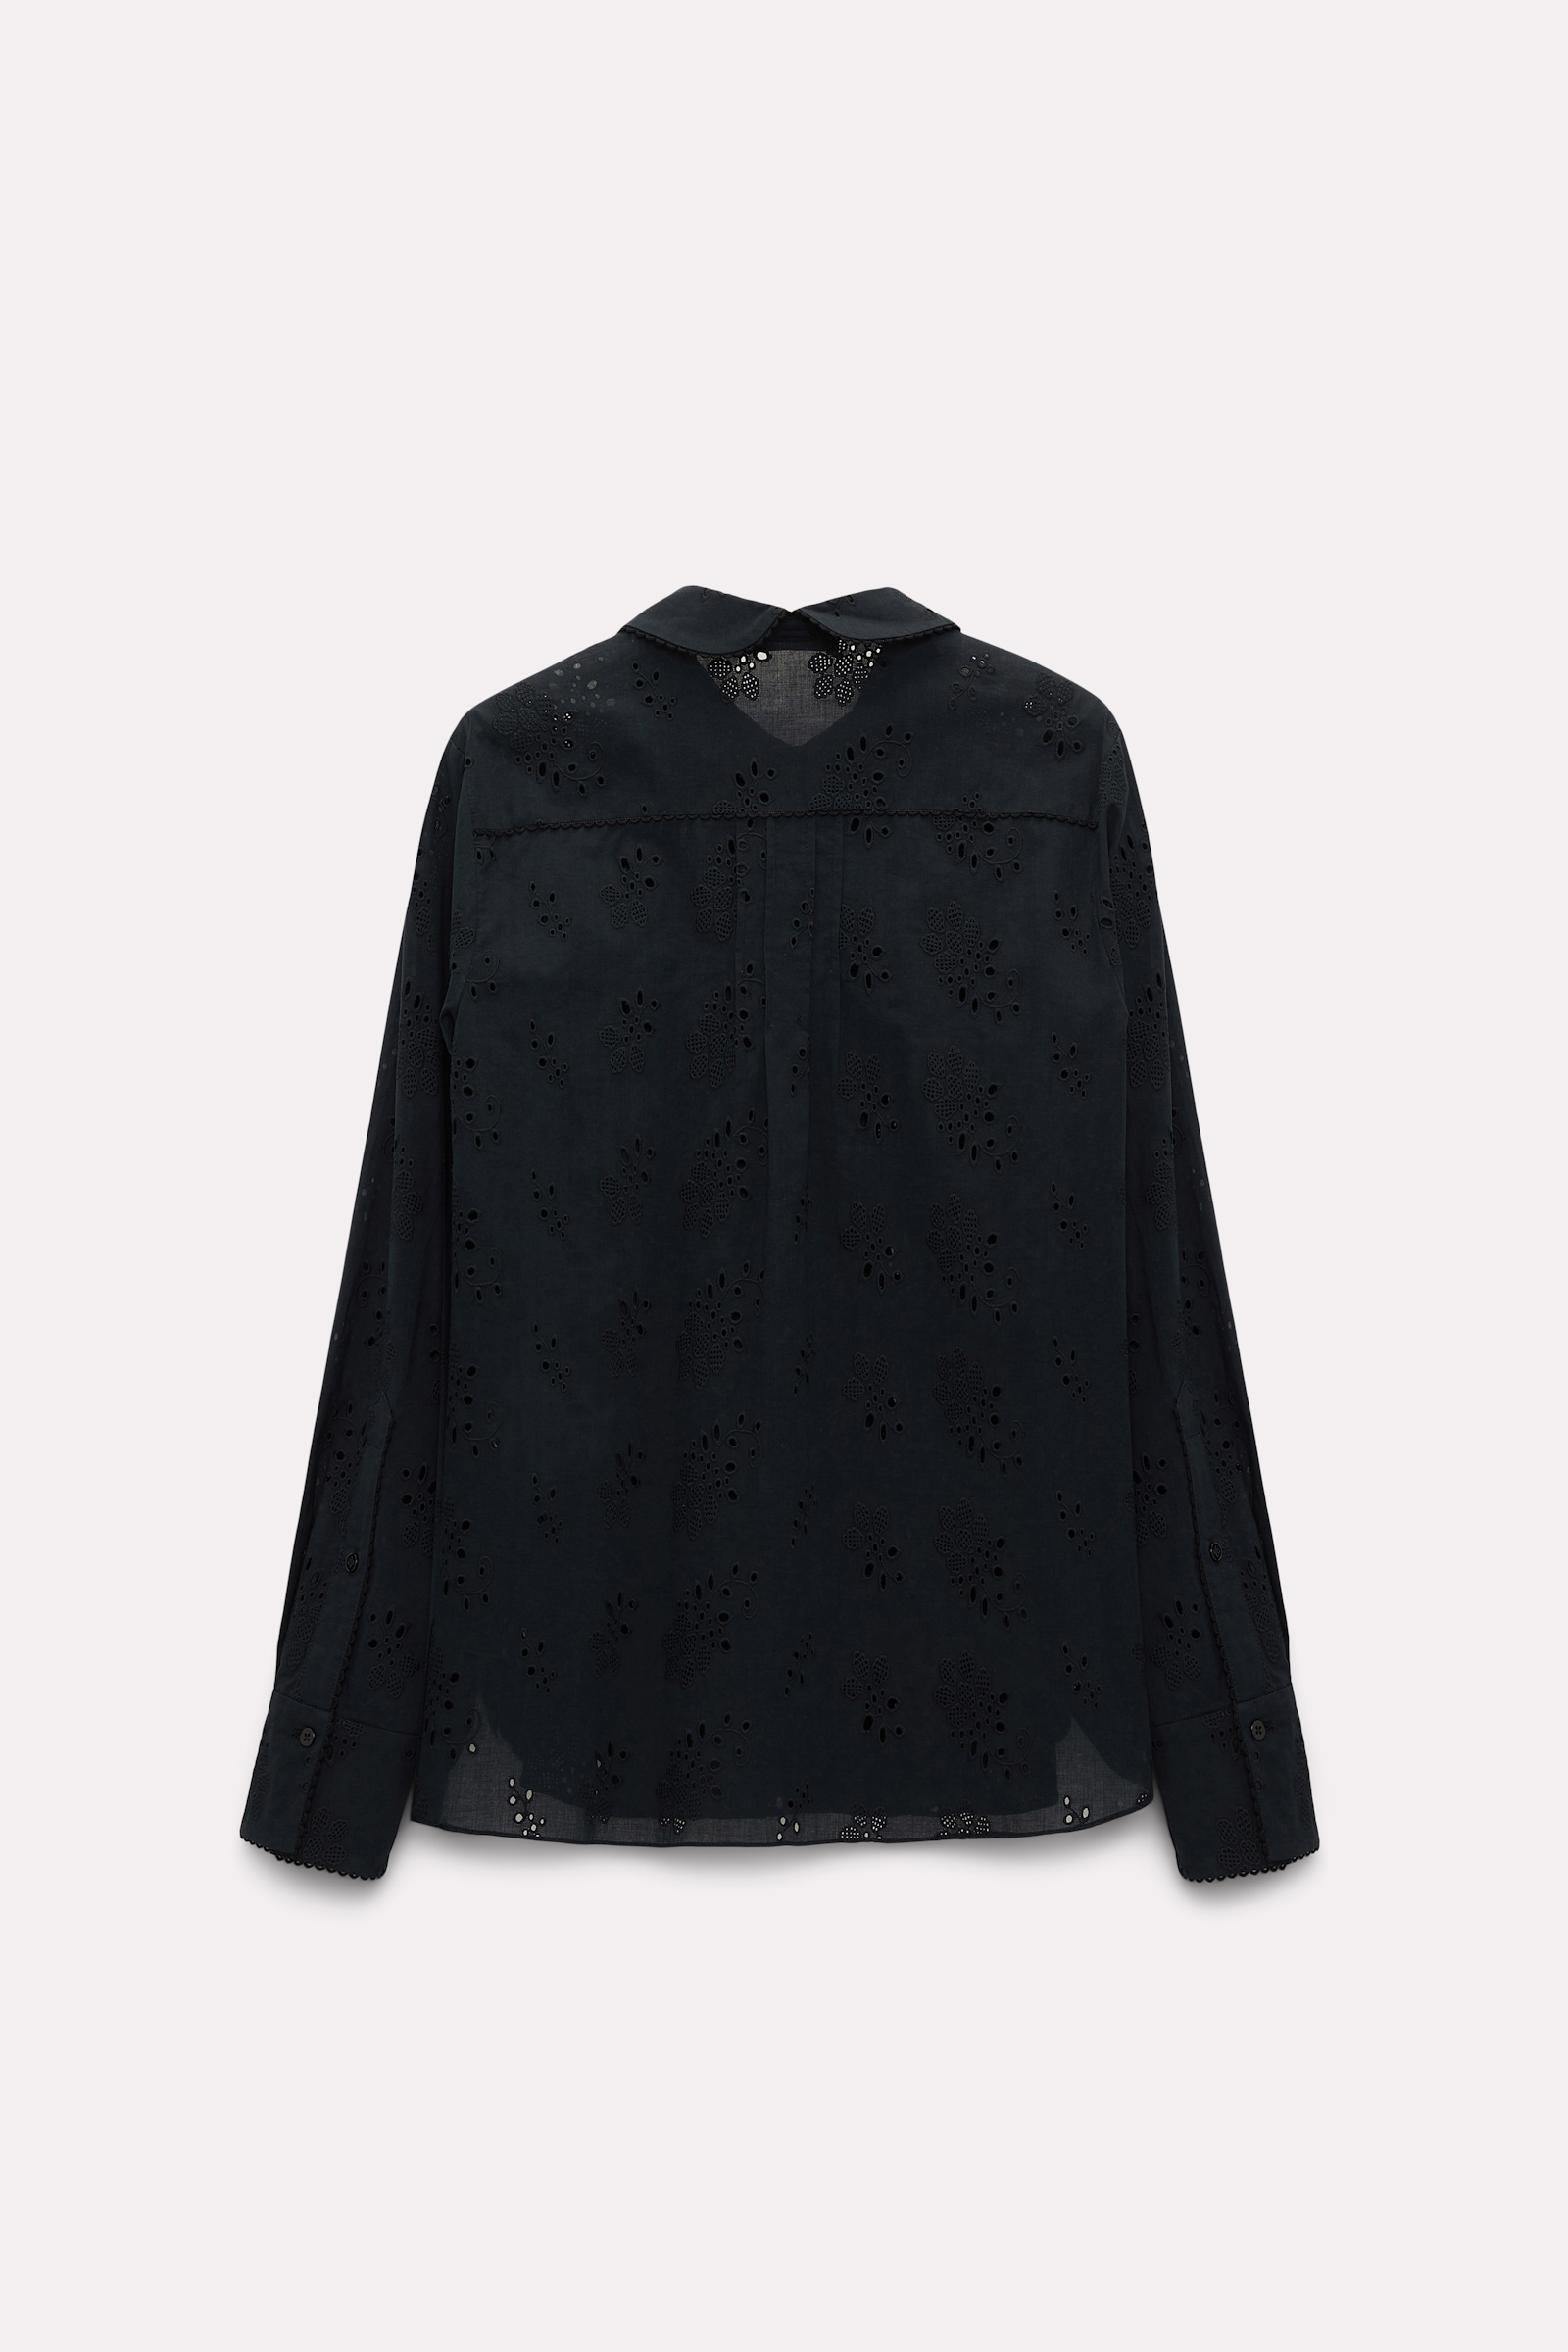 Dorothee Schumacher Bluse aus Broderie Anglaise pure black